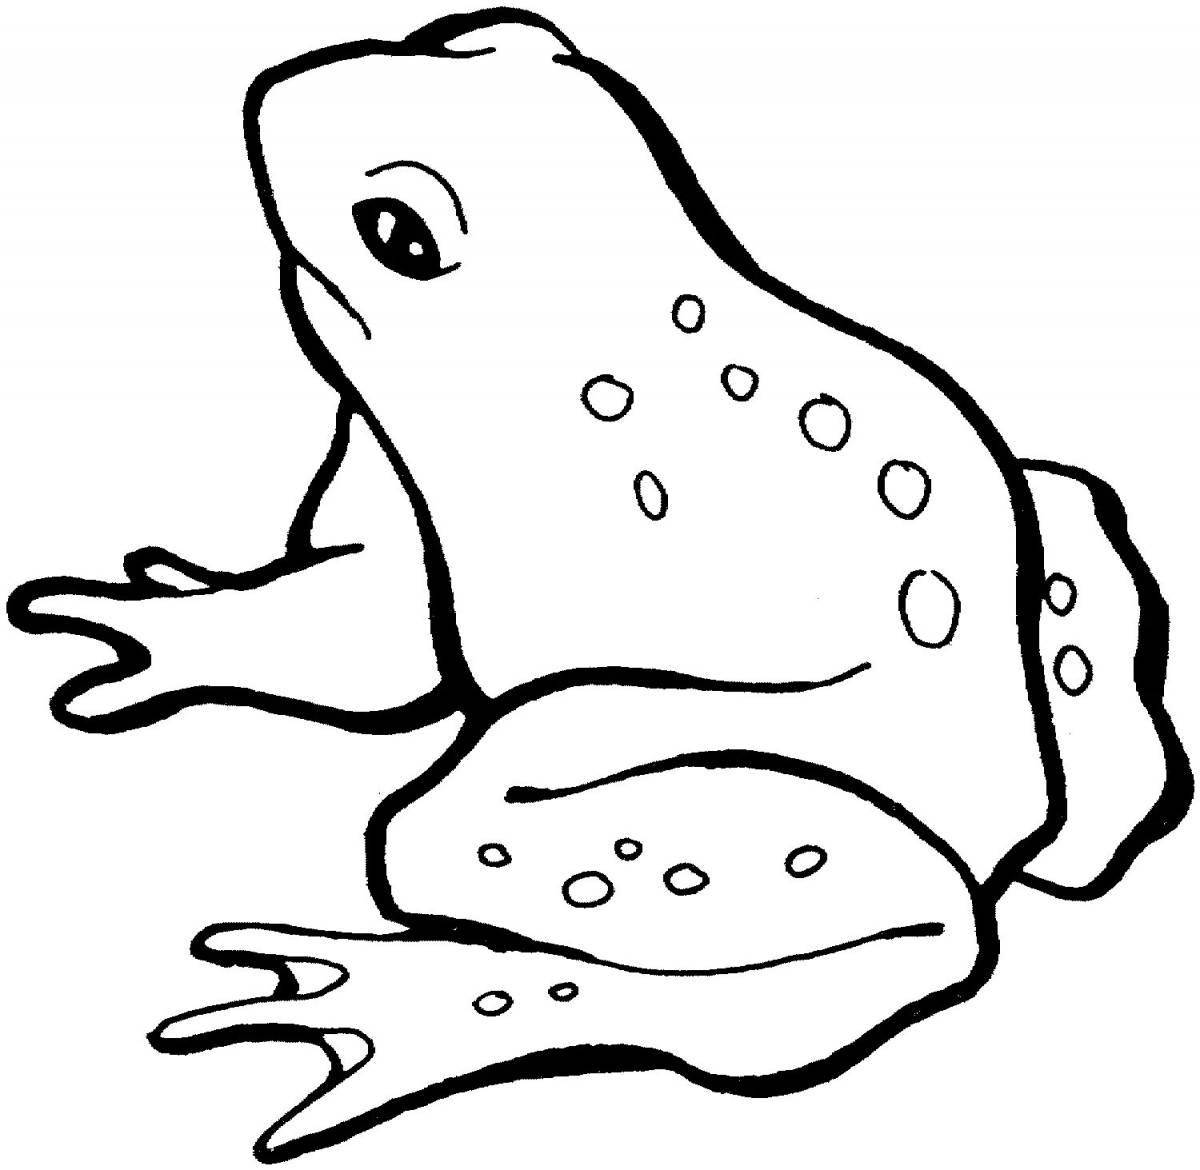 Fancy frog coloring page